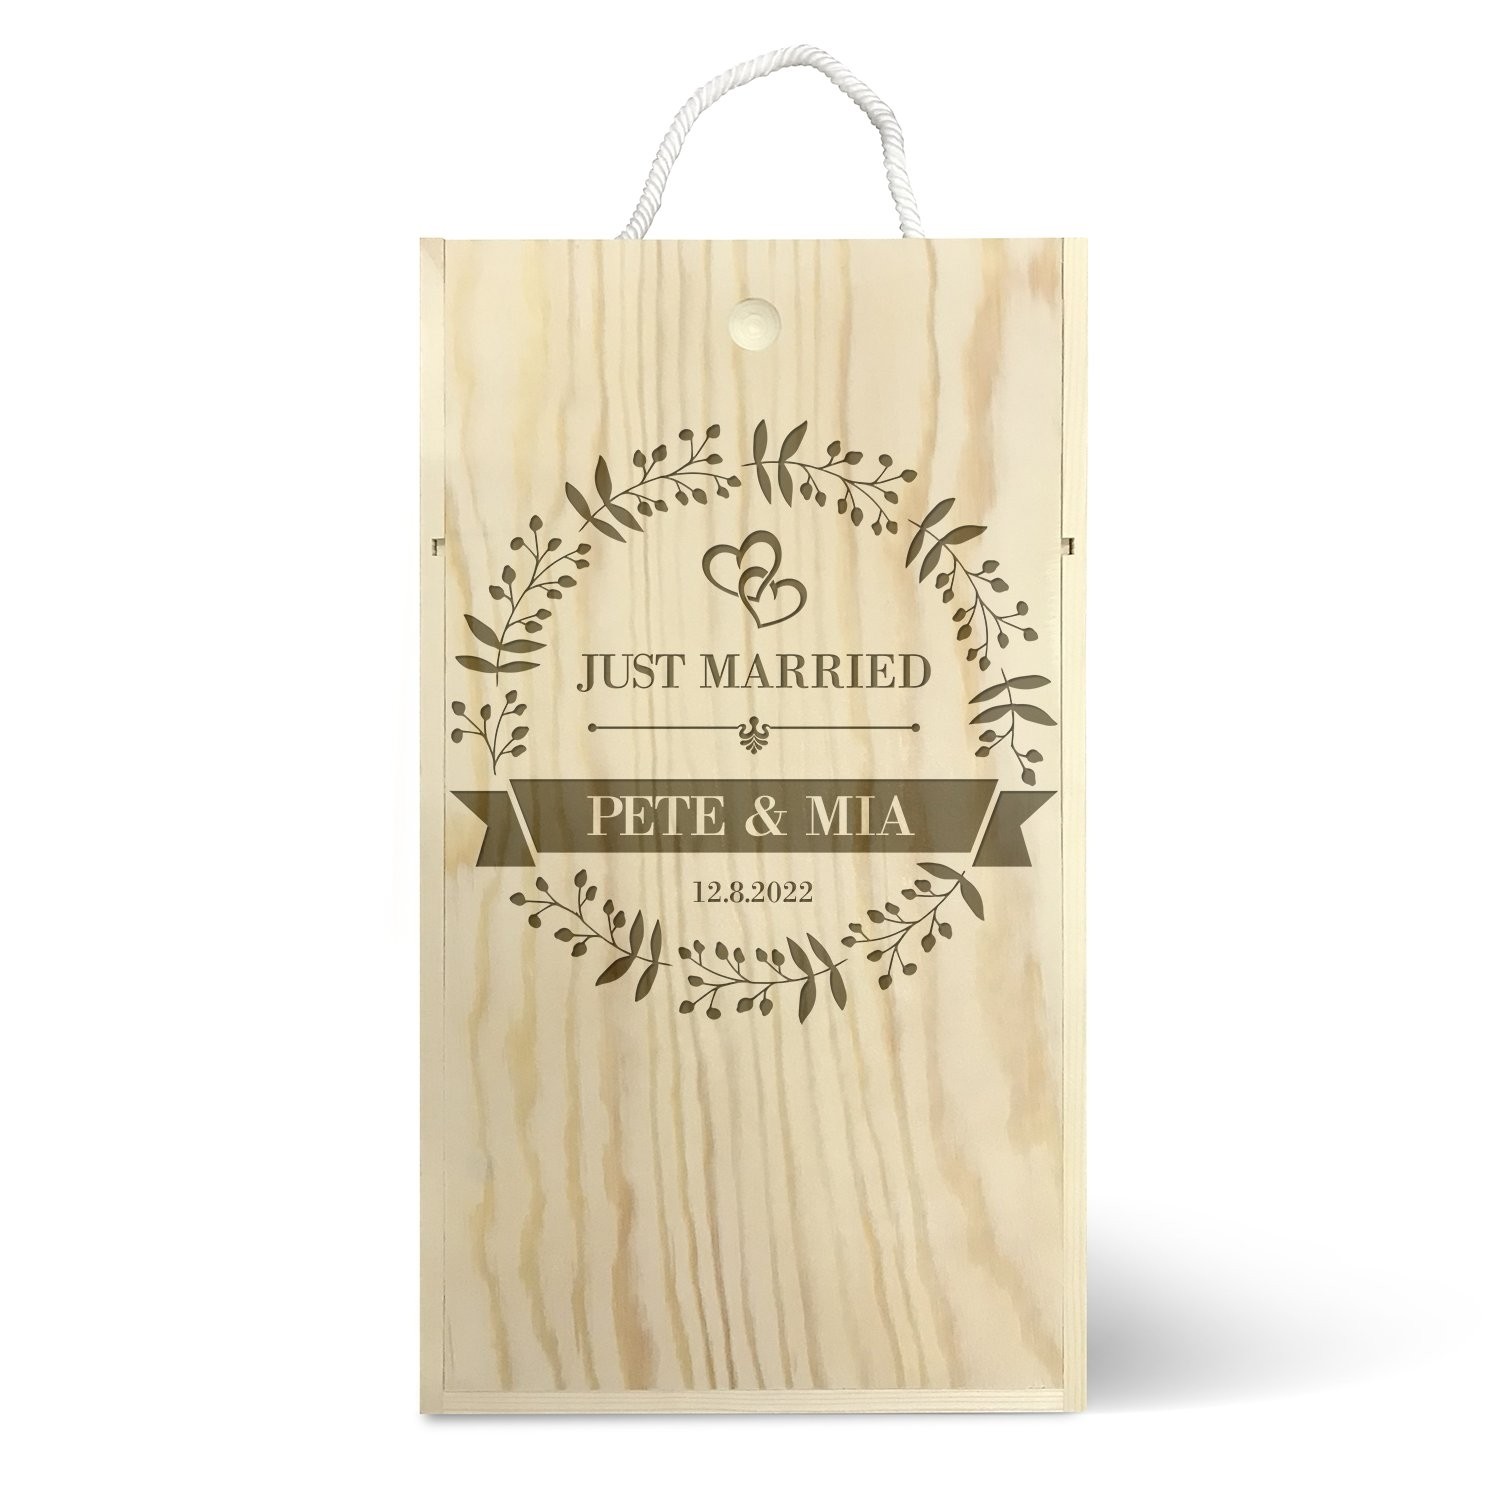 Just Married Double Wine Box